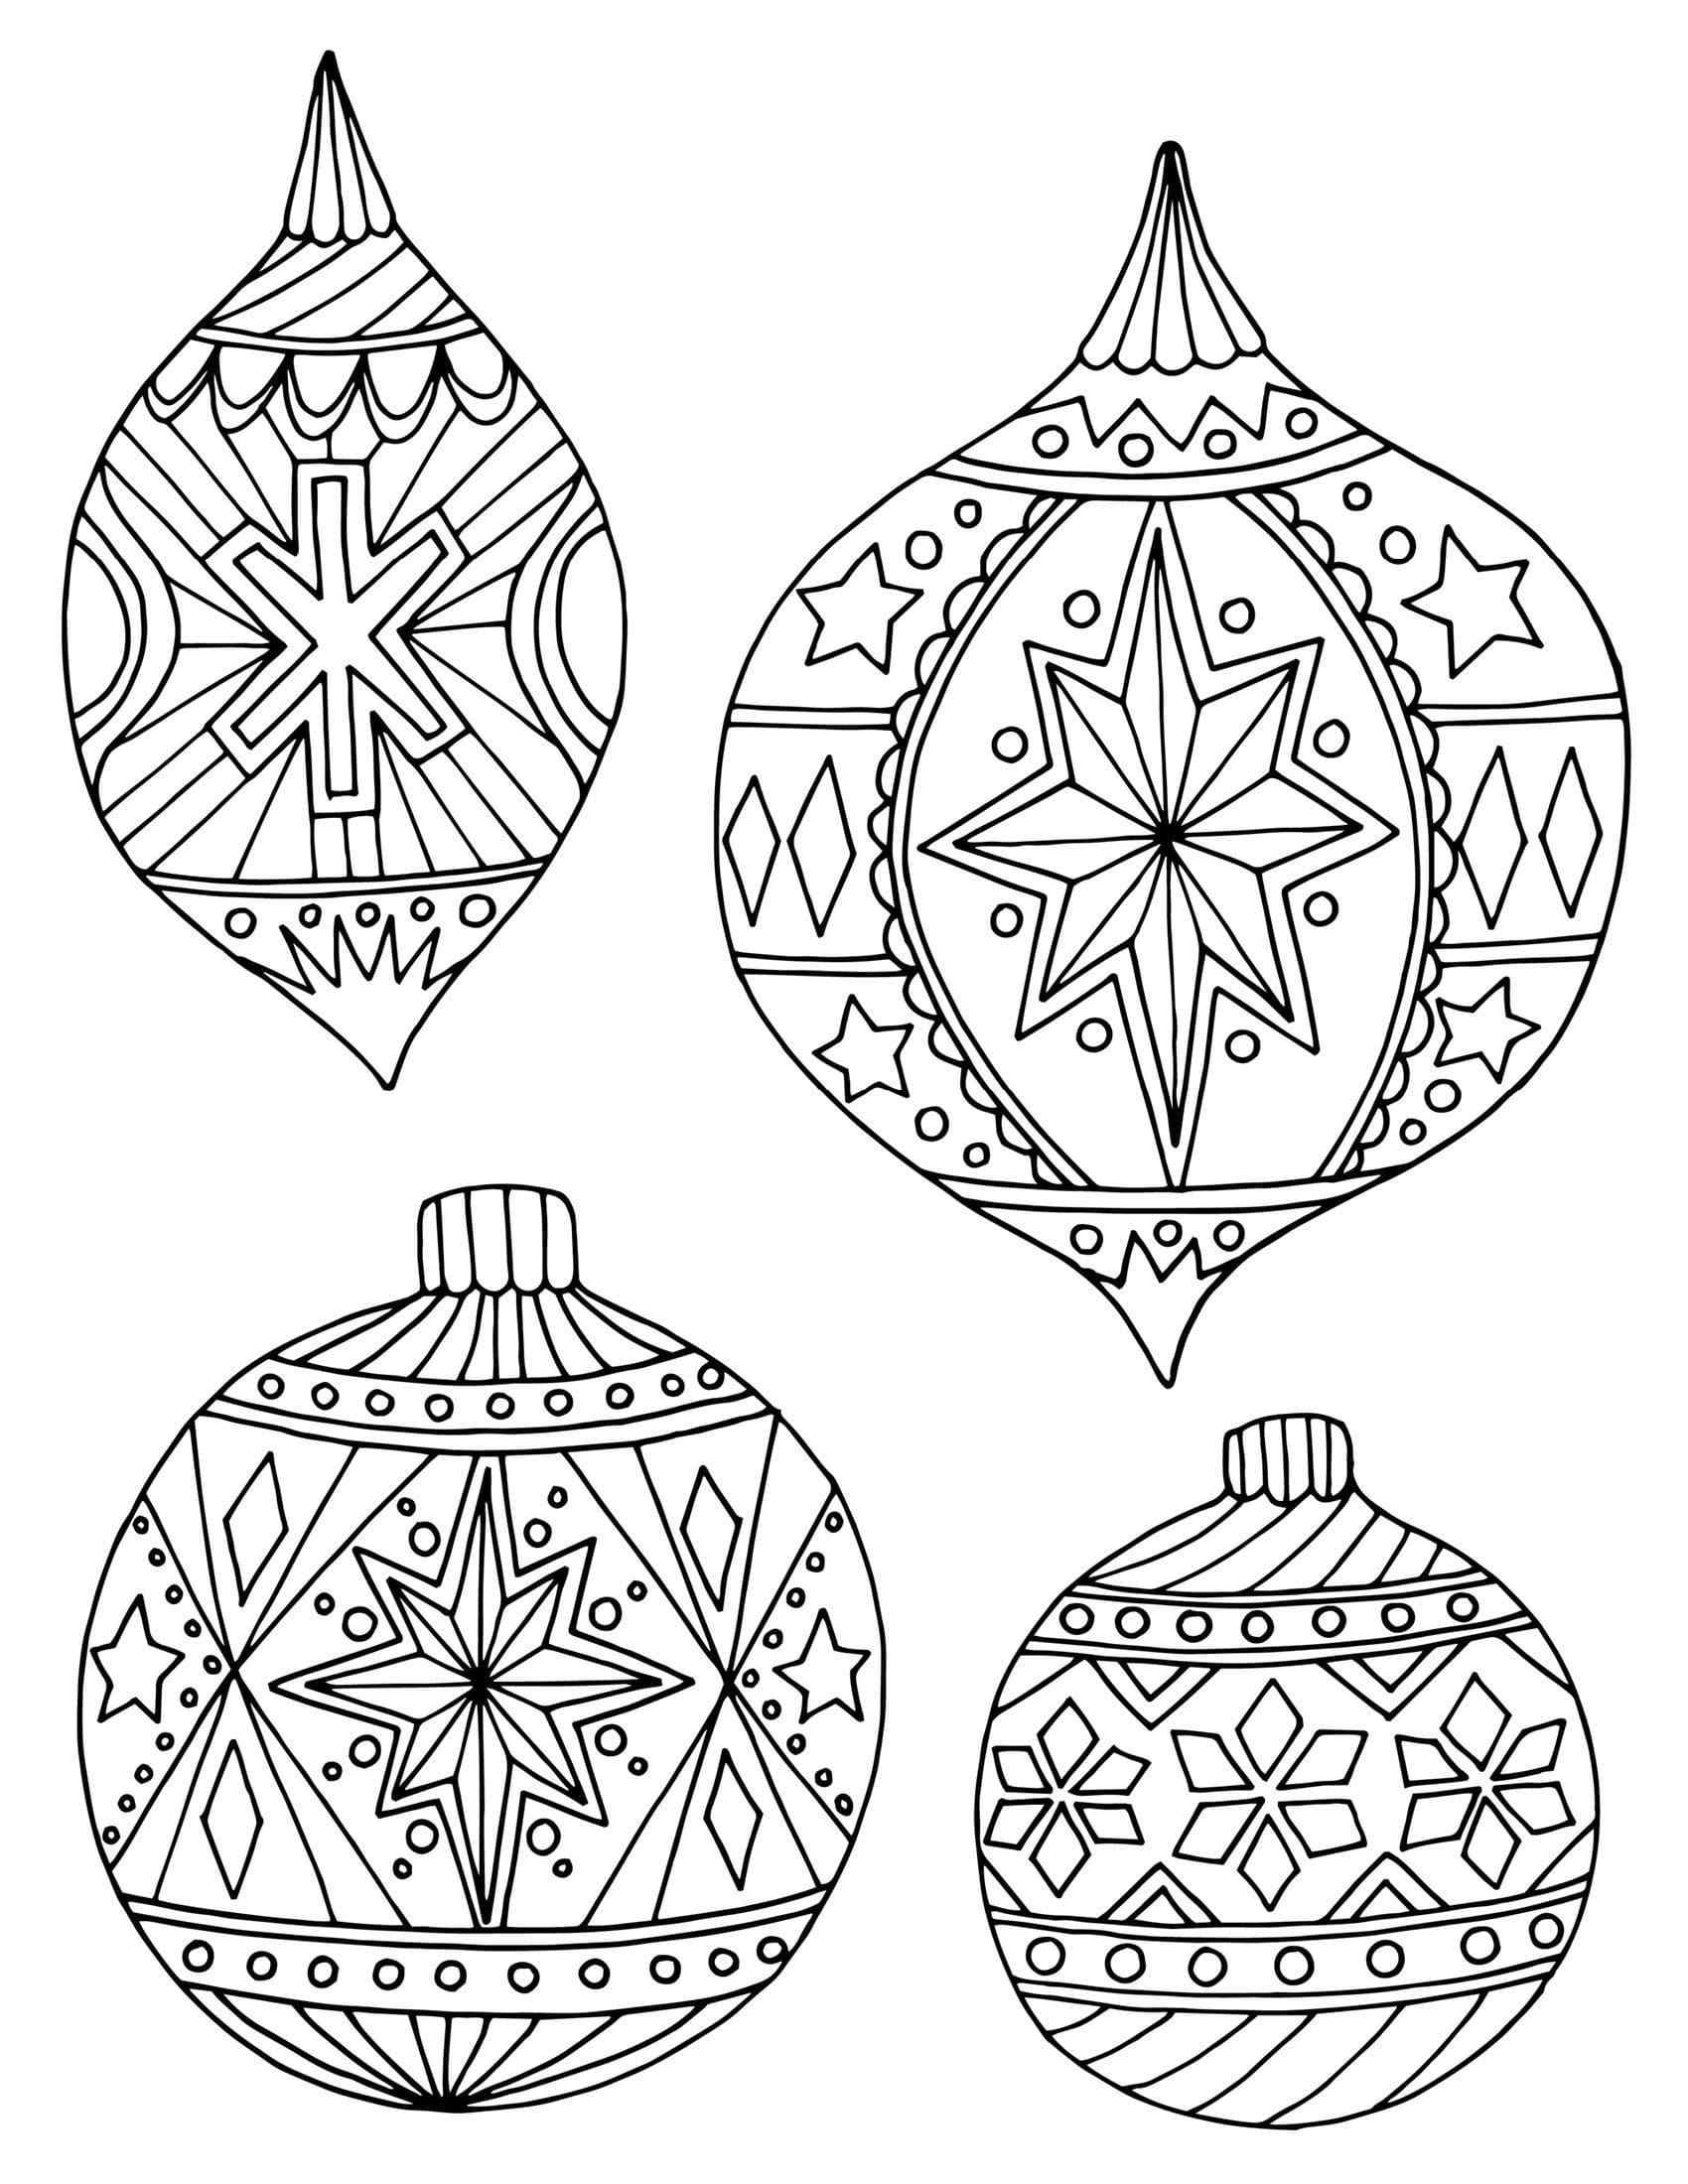 The Main Decorations Of The Holiday Tree Coloring Page